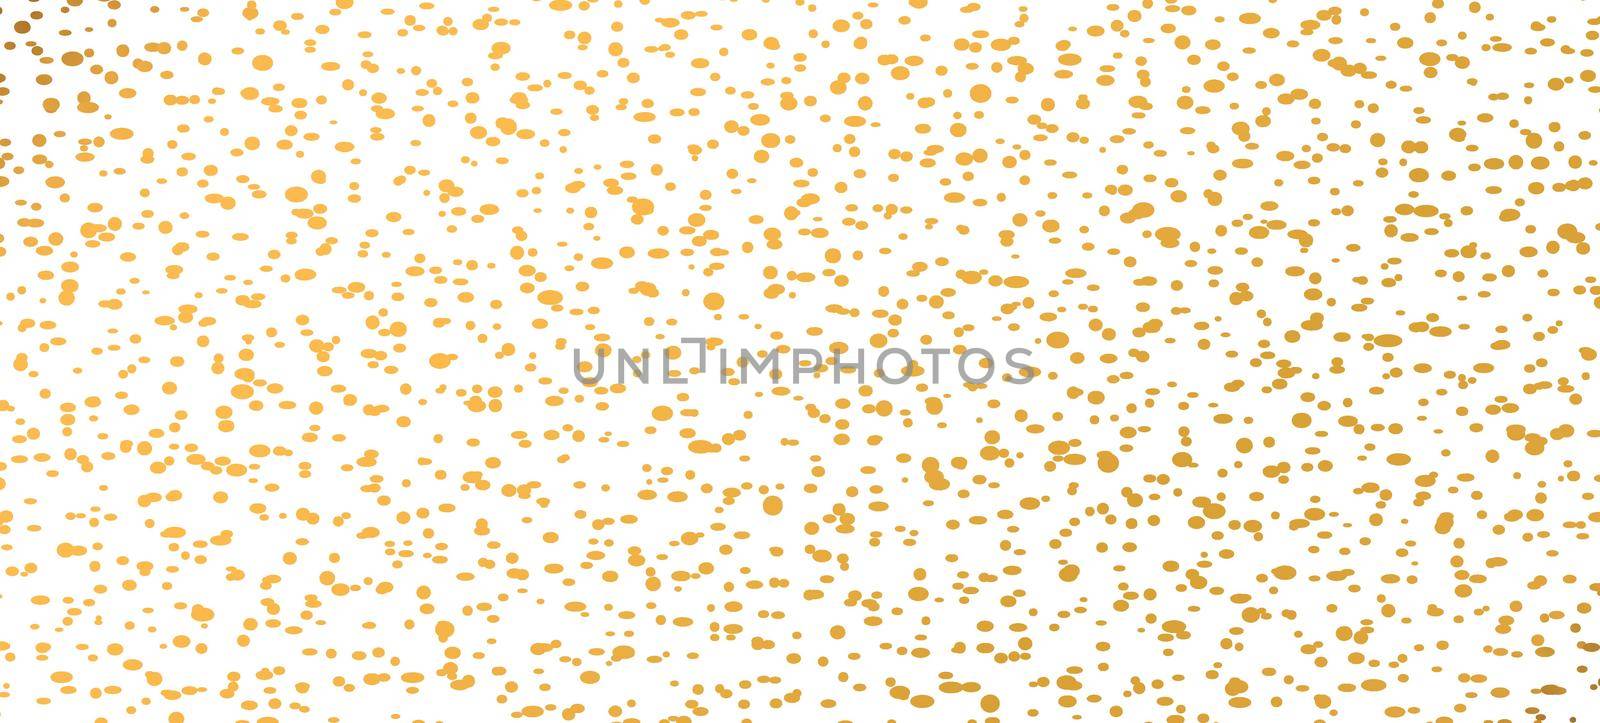 Abstract fashion polka dots background. White dotted pattern with golden gradient circles. Template design for invitation, poster, card, flyer, banner, textile, fabric.